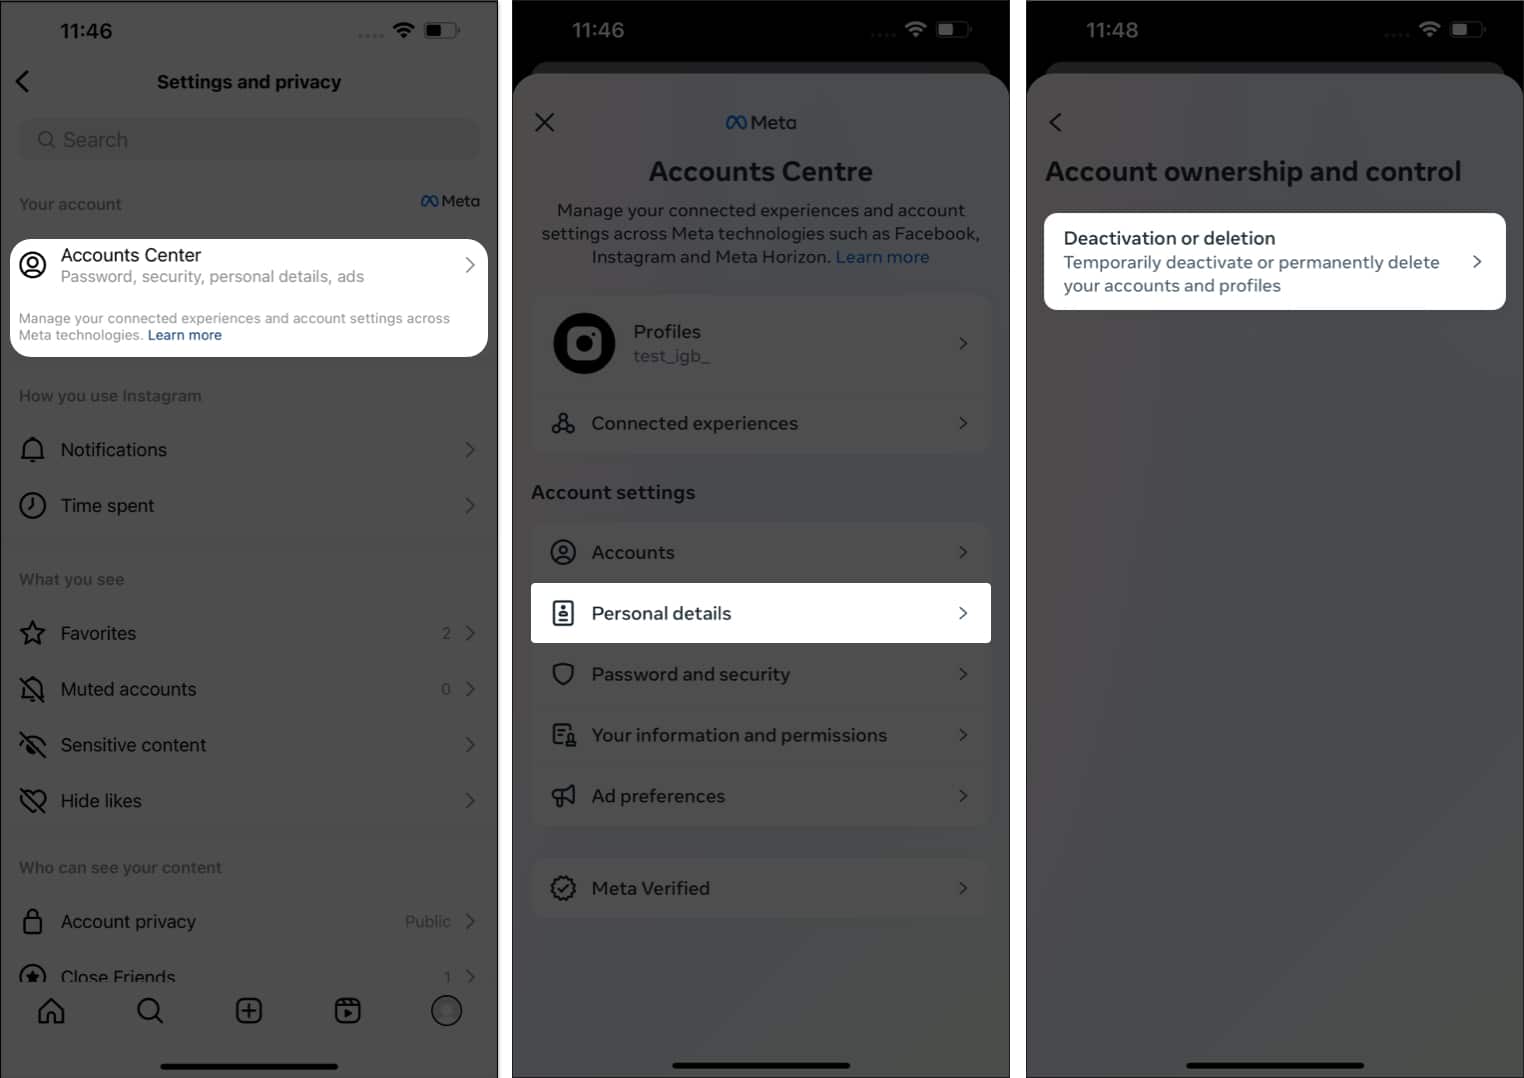 How to Delete or Deactivate Your Instagram Account on iPhone